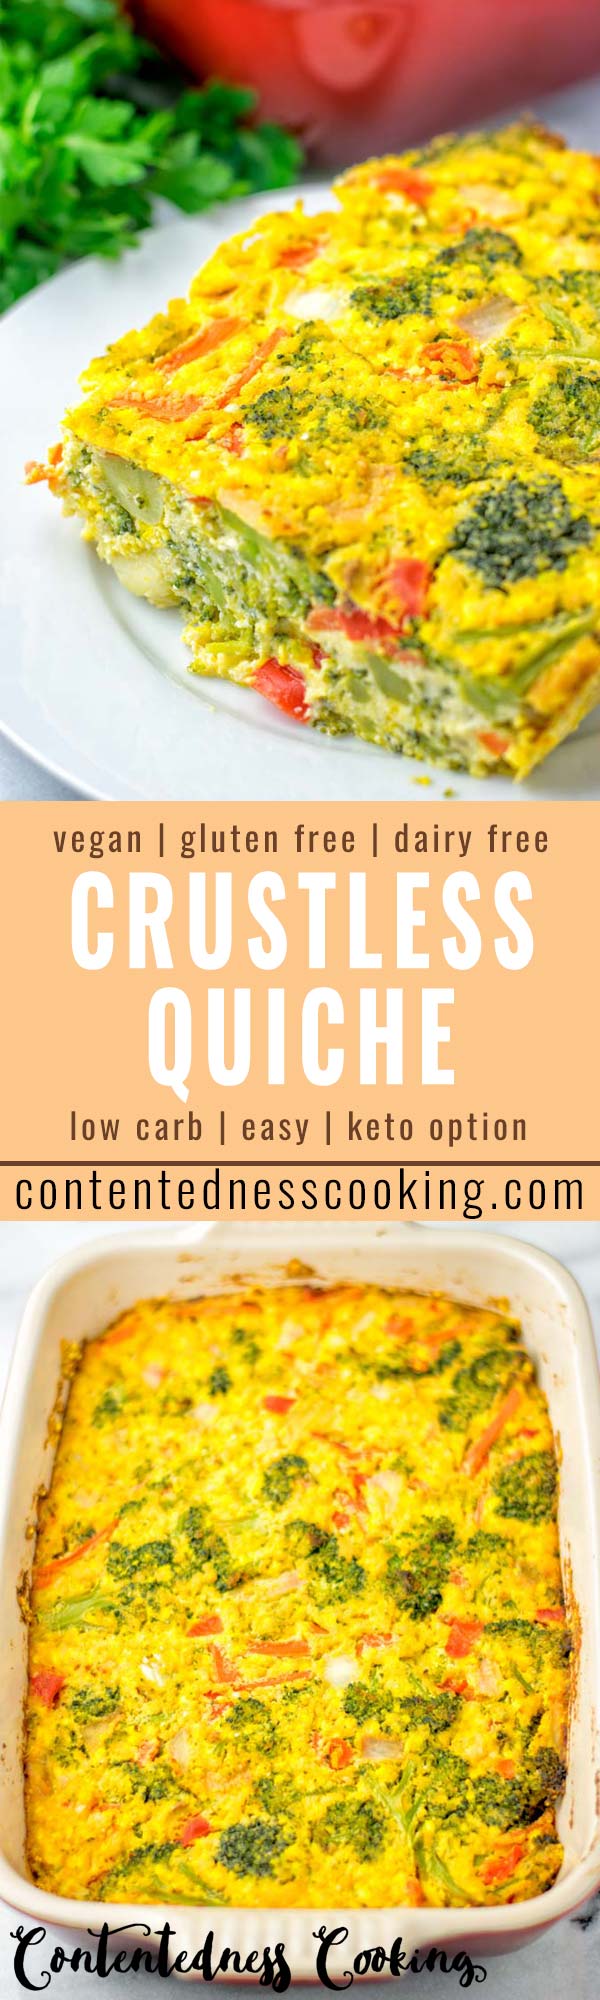 This Crustless Quiche is low carb, super easy to make, and so delicious. It’s naturally vegan, gluten free, kids friendly, filling and a winning combination that the whole family will love for dinner, lunch, meal prep and so much more. Full of broccoli, carrots, and vegetables you love. You will also find a keto option. #vegan #dairyfree #glutenfree #vegetarian #worklunchideas #mealprep #dinner #lunch #contentednesscooking #crustlessquiche #kidsfriendlydinners #familyfood #lowcarbmeals 